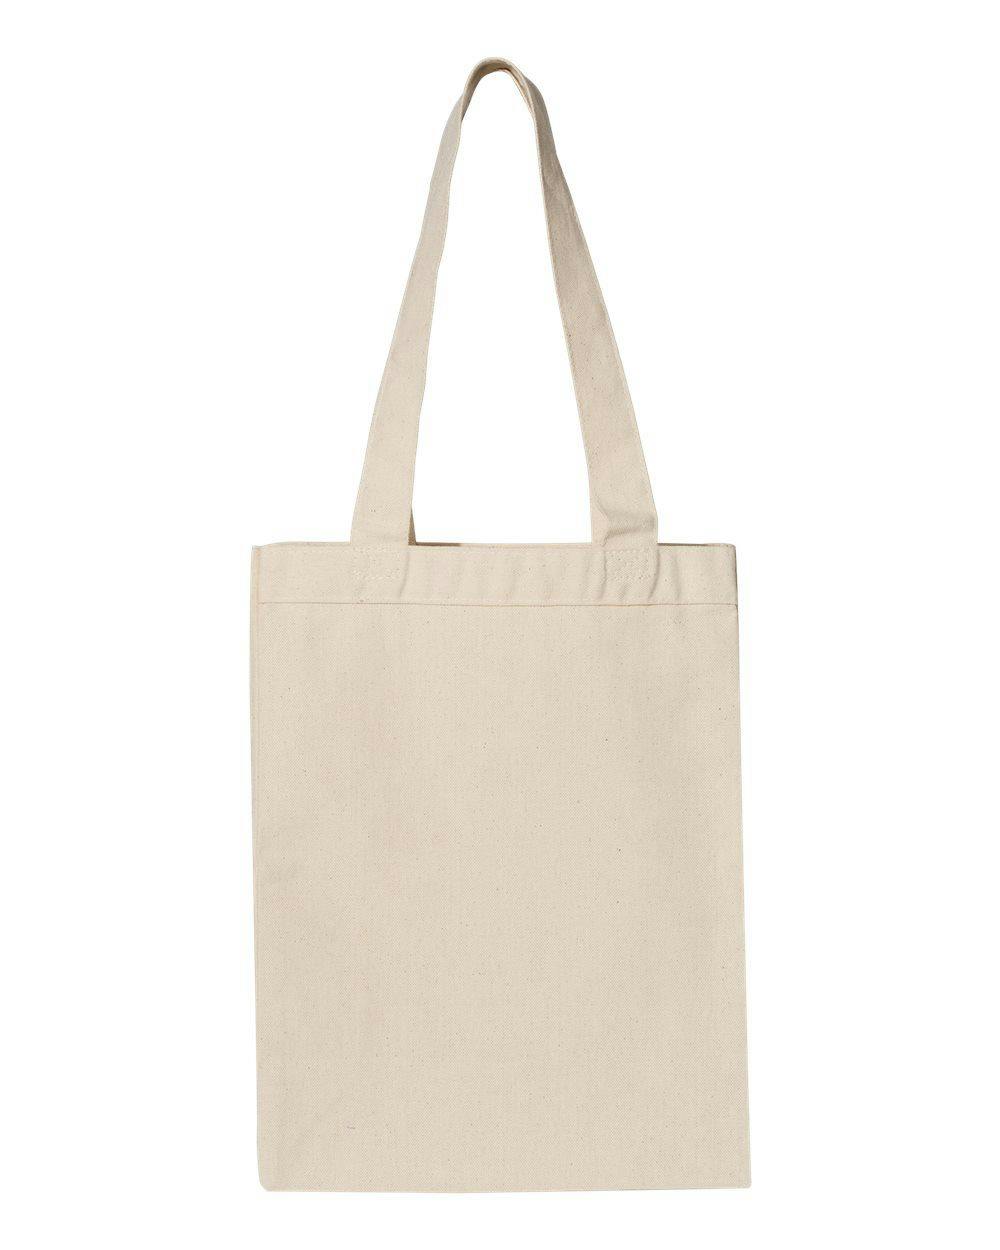 Image for 12L Gussetted Shopping Bag - Q1000